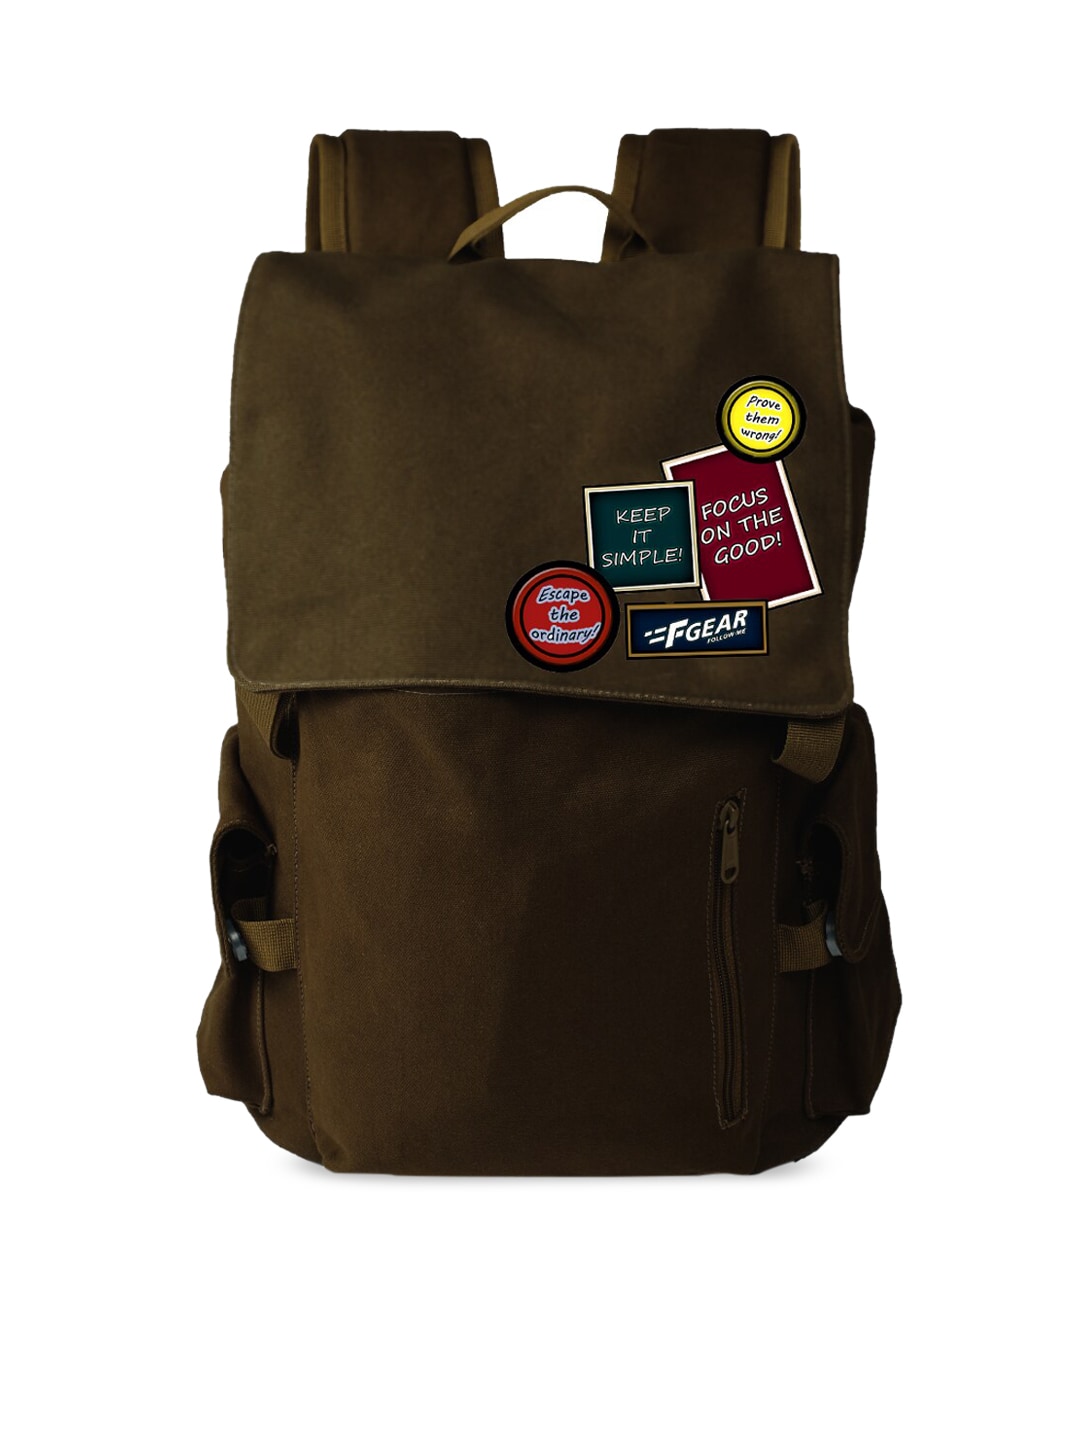 F Gear Unisex Olive Green Graphic Backpack Price in India